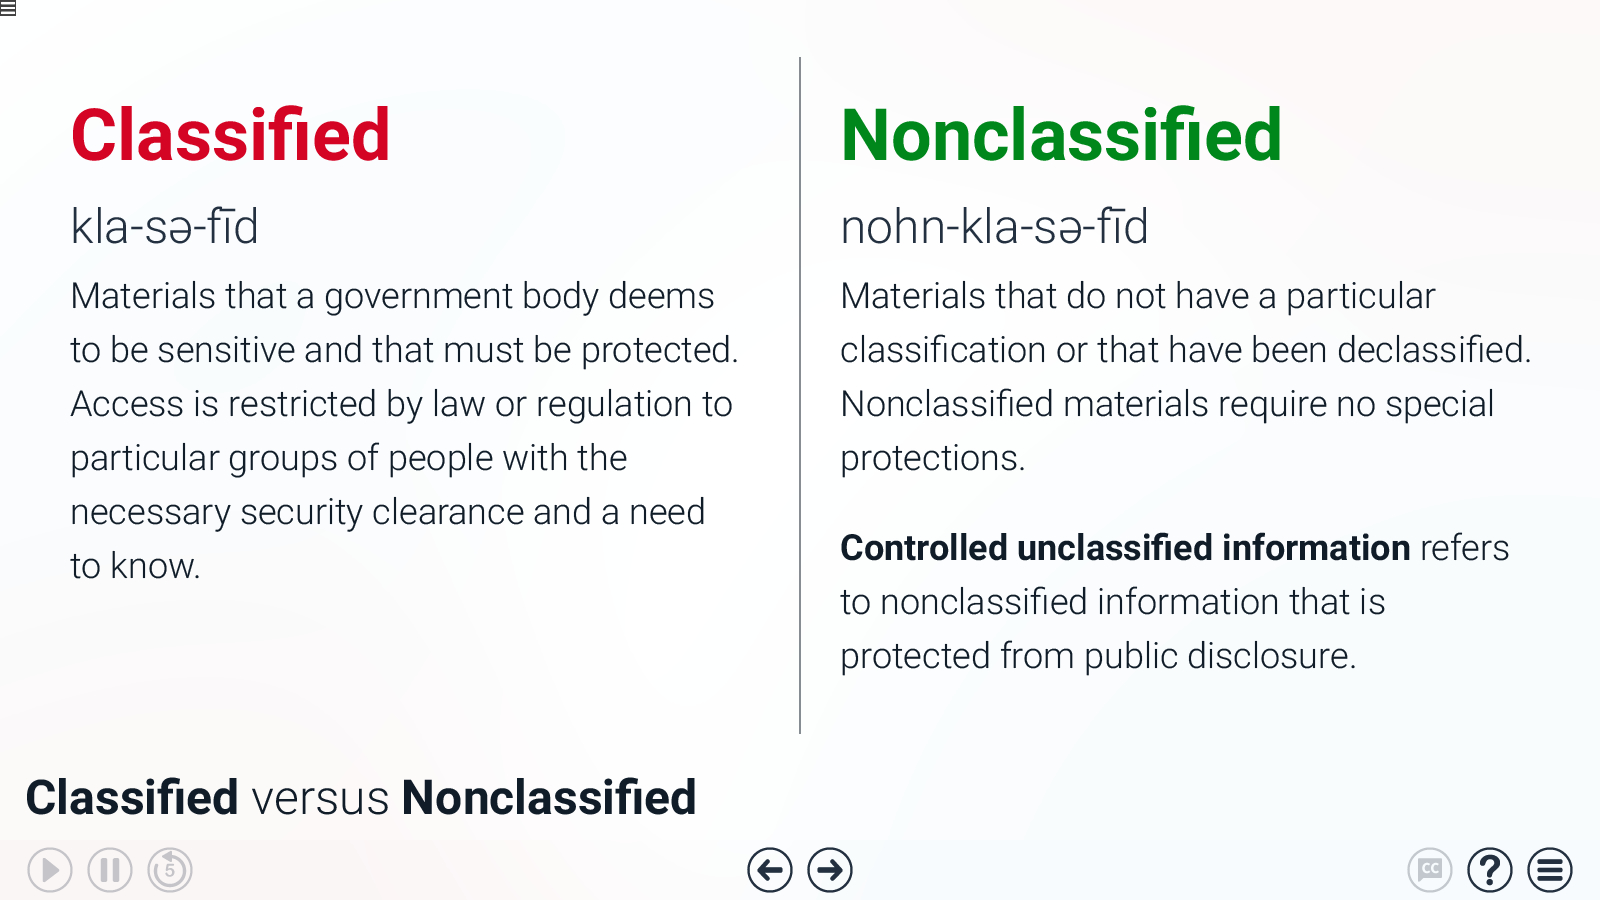 a slide describing the difference between classified and nonclassified materials